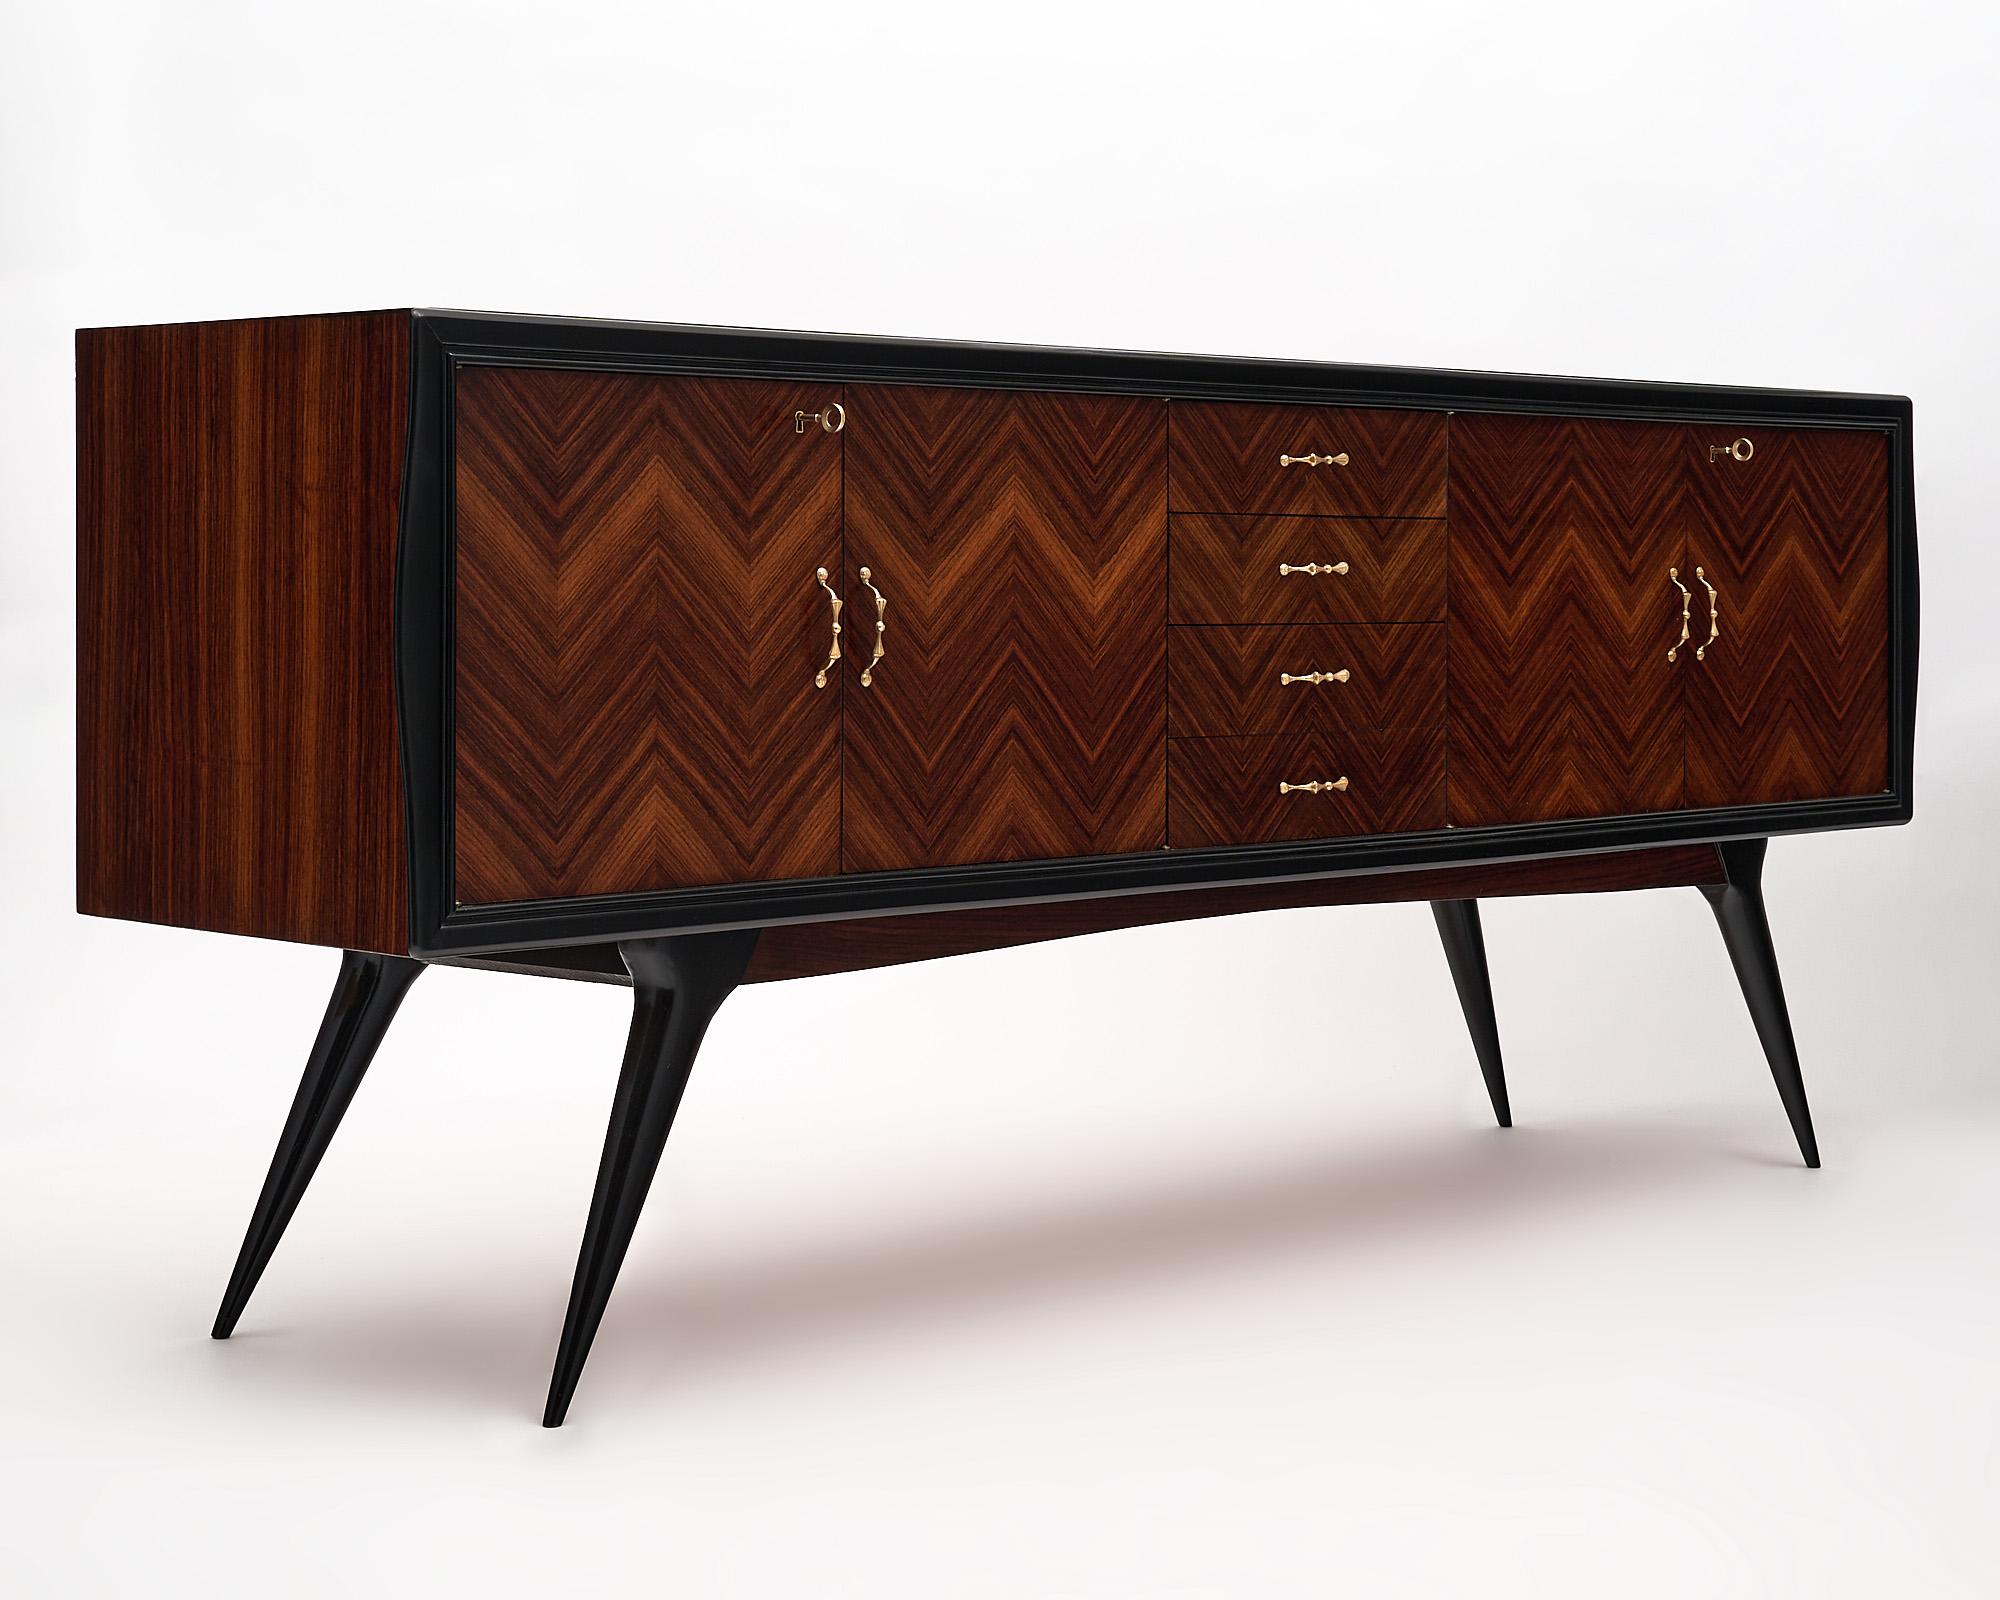 Buffet/Enfilade, French, Mid-Century Modern made of Macassar of Ebony in a chevron pattern, ebonized trims and legs. This spectacular credenza features four dovetailed drawers and two double doors opening to wood and glass shelving. Stylized solid